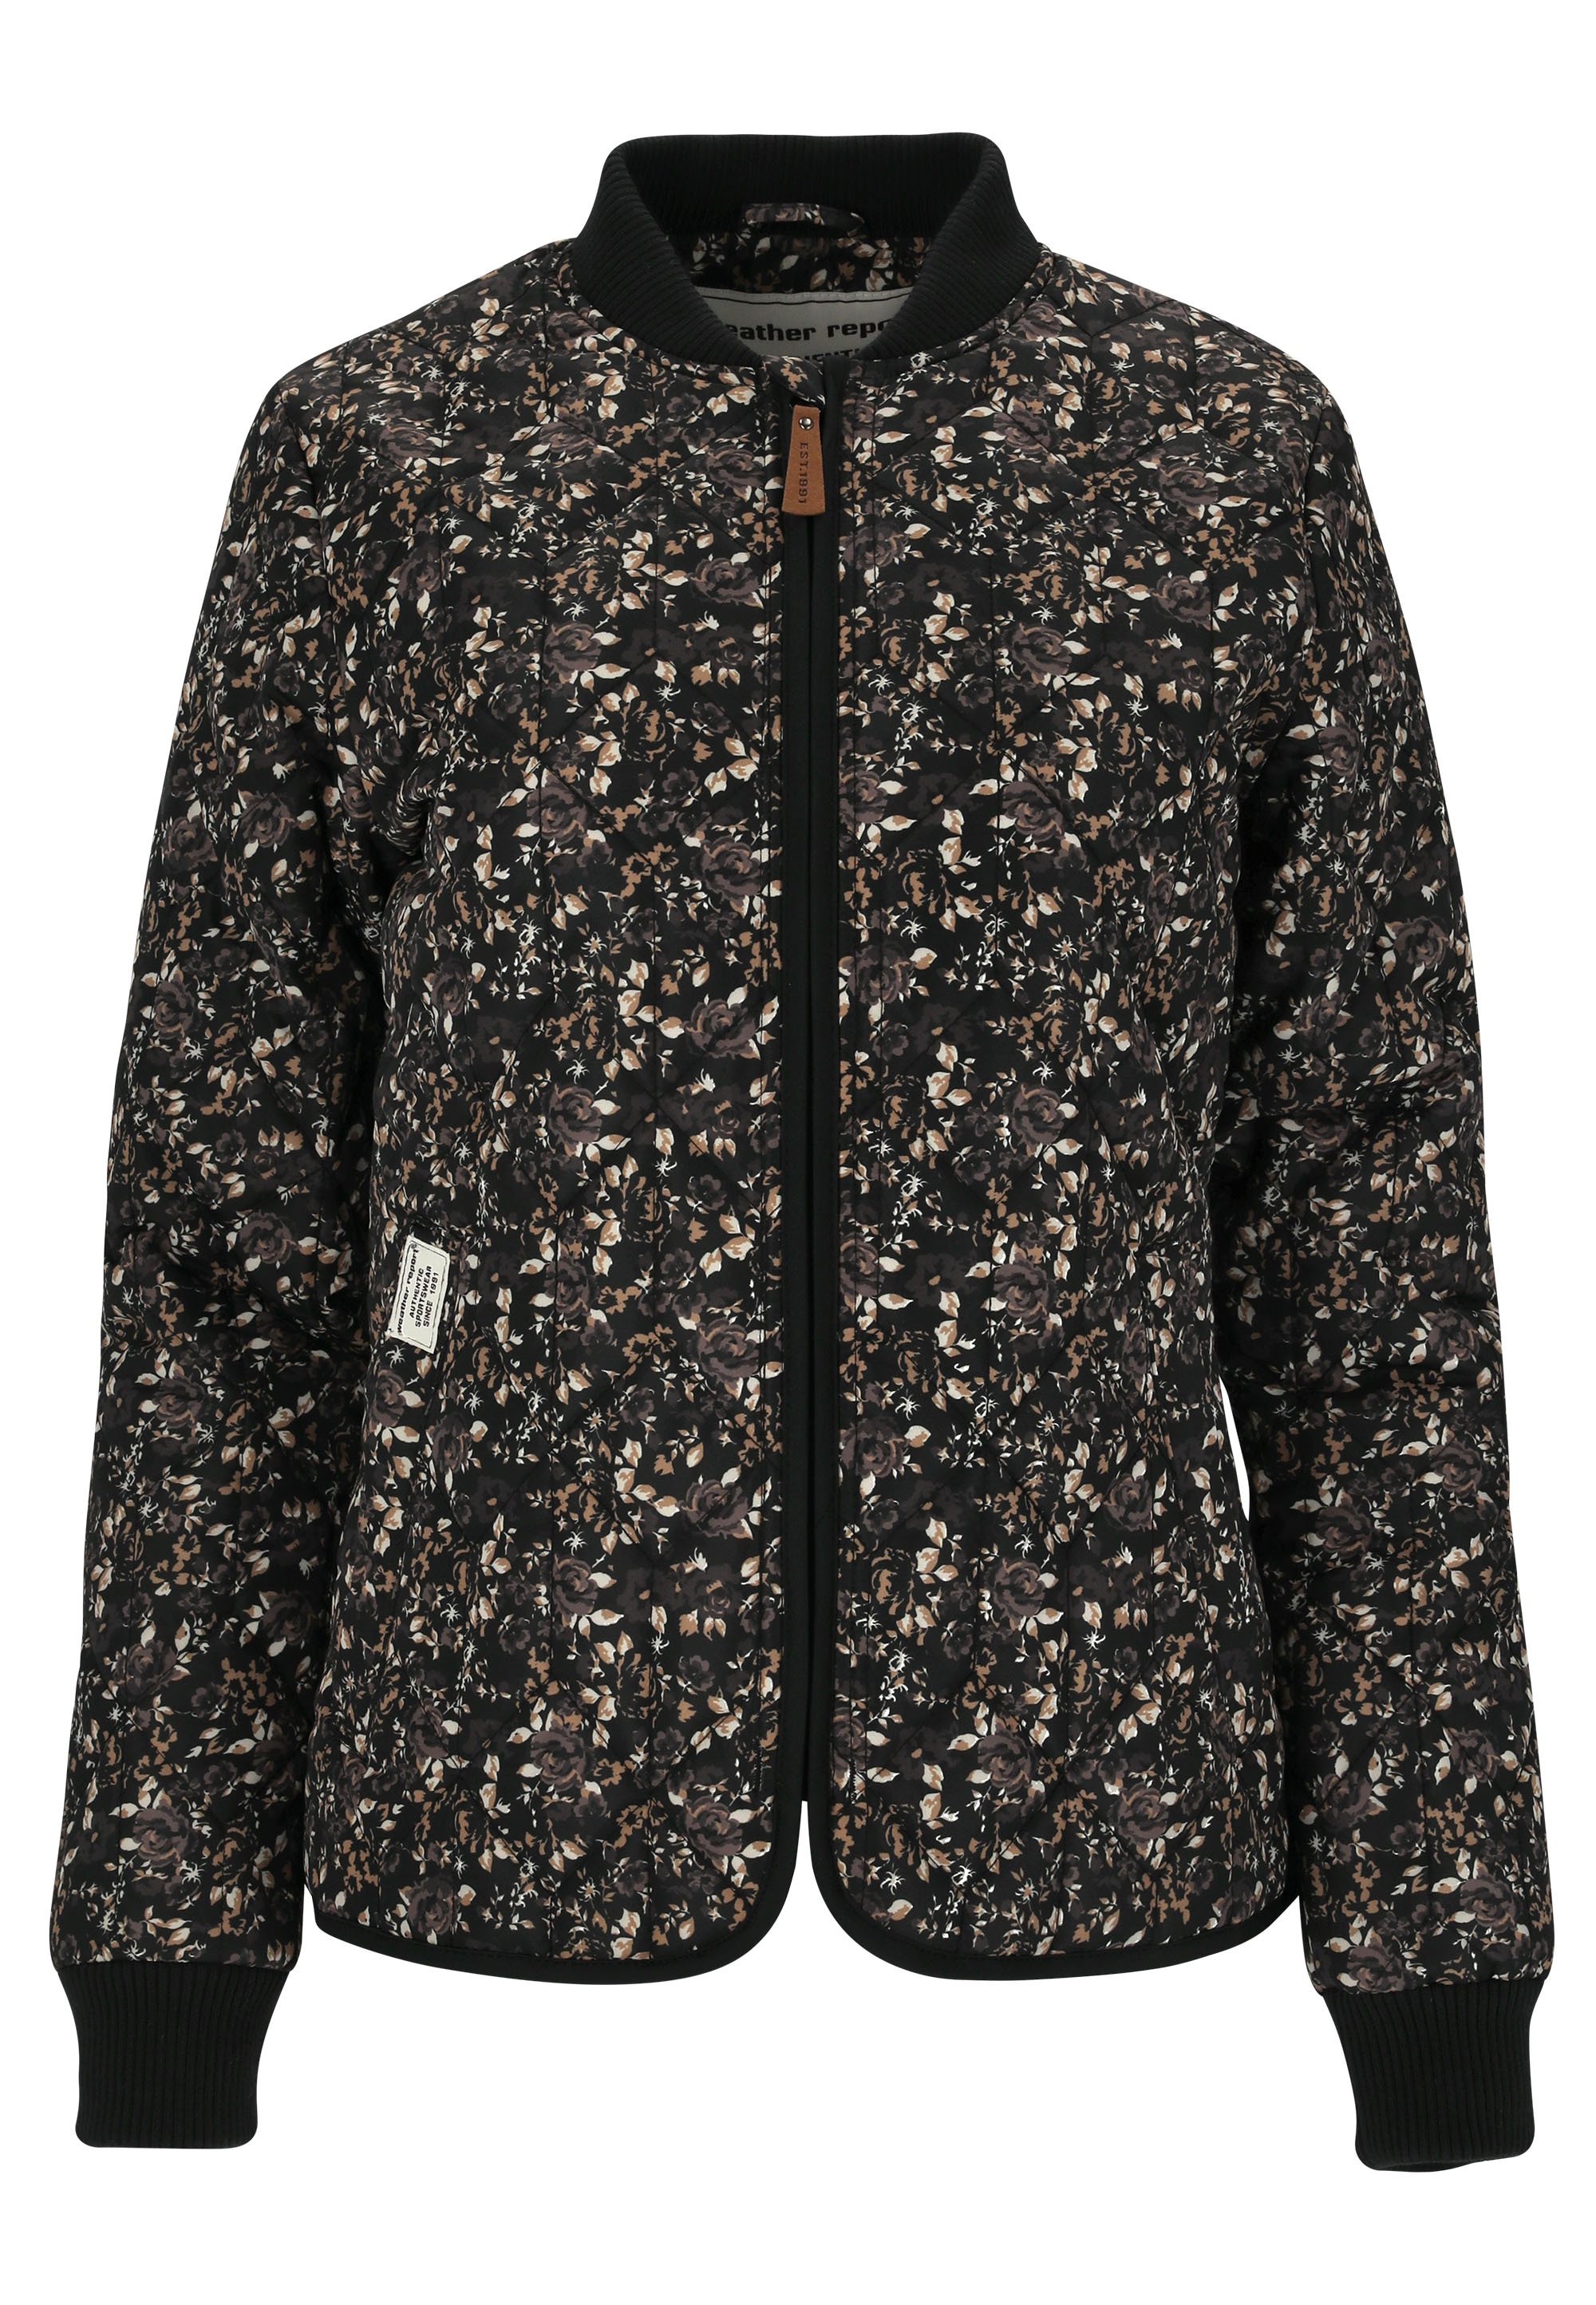 WEATHER REPORT Outdoorjacke »Floral«, floralem mit Allover-Muster online